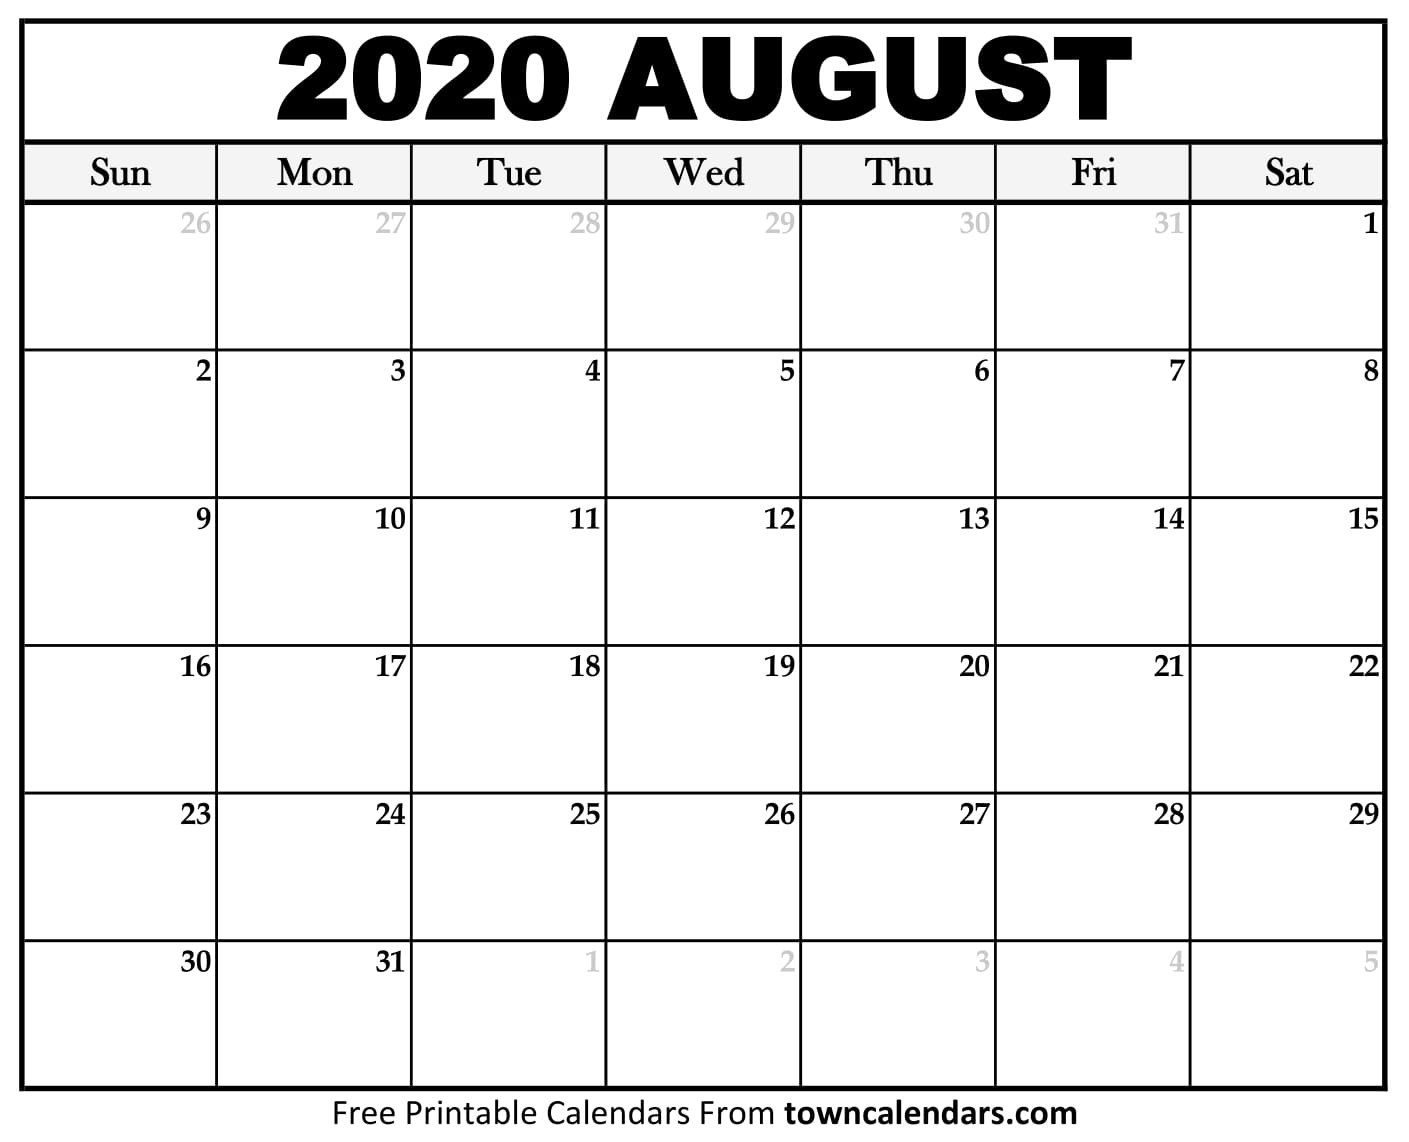 Collect August Calendar Print Out